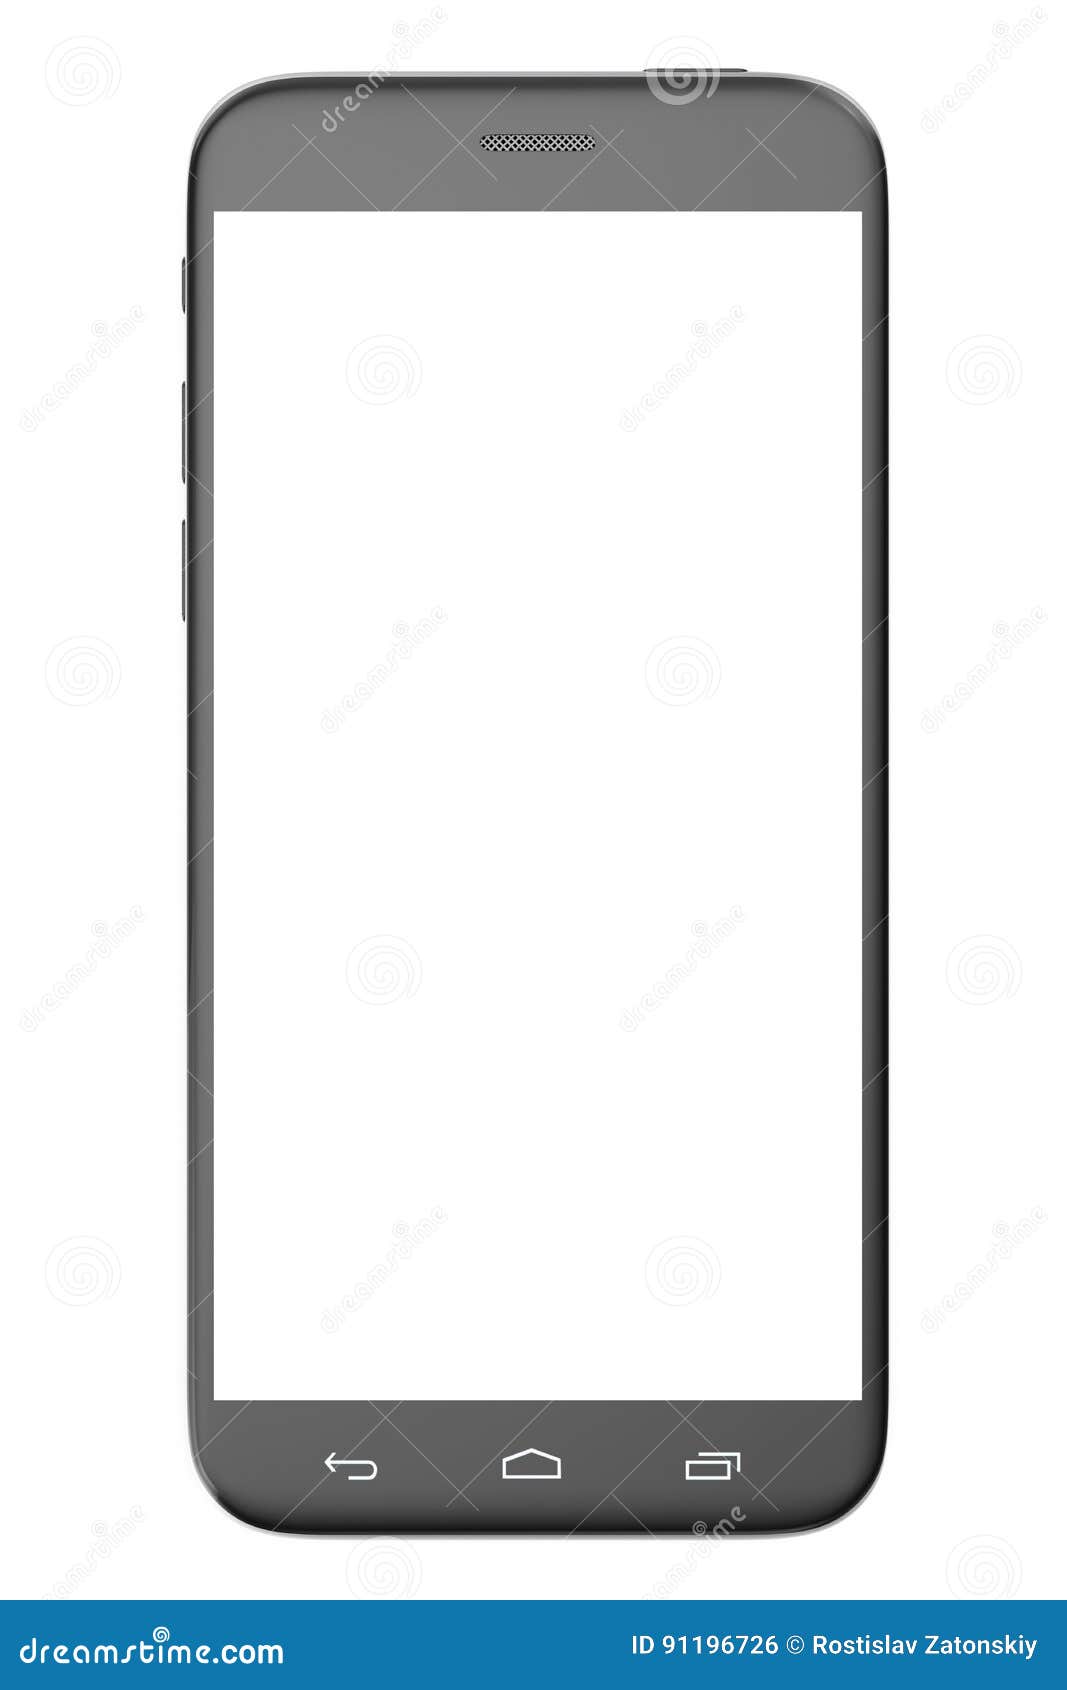 Download Modern Smart Phone. White Screen For Mockup, Isolated On White Background, 3d Illustration Stock ...